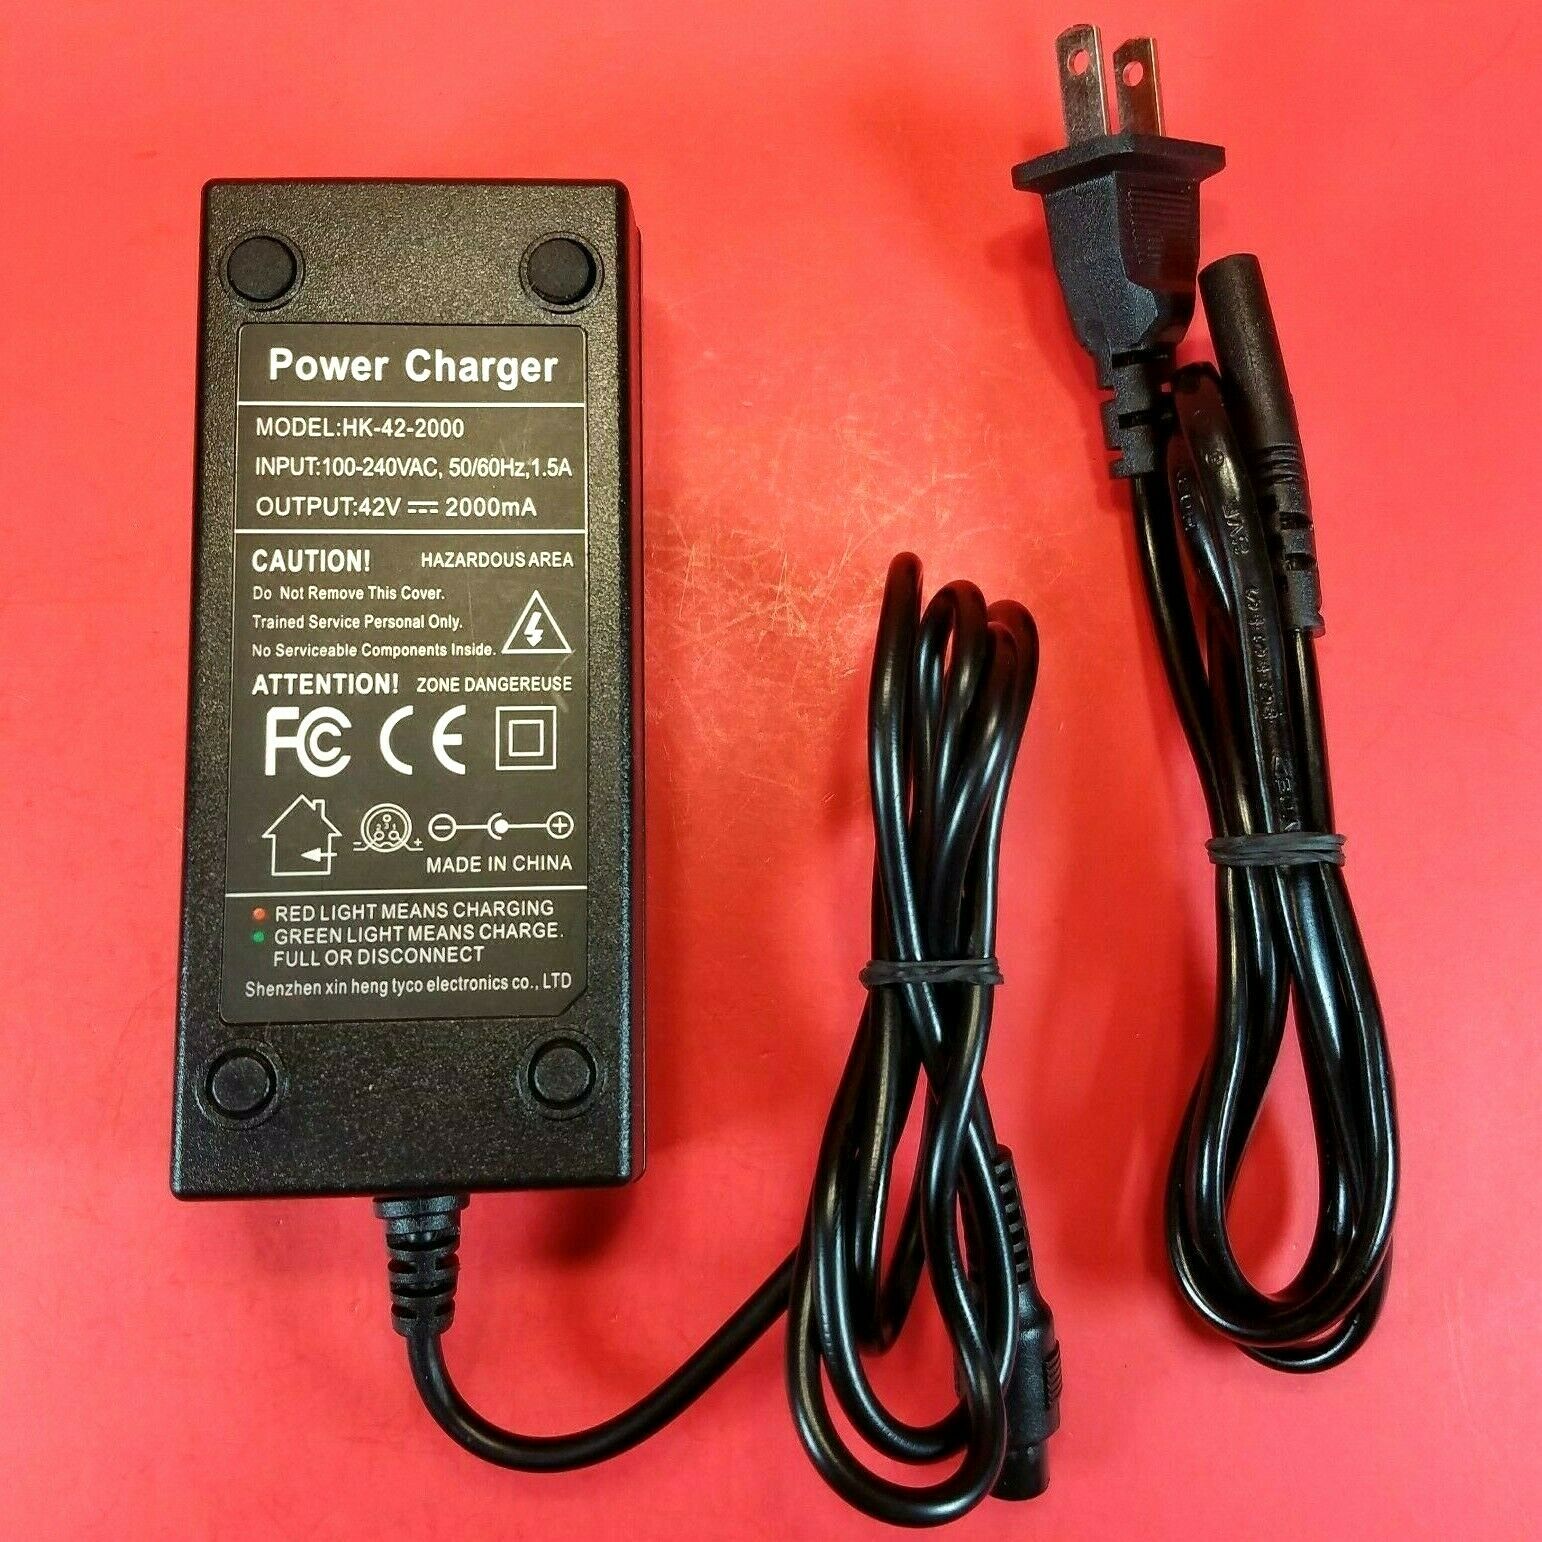 Power Charger HK-42-2000 Power Supply Adaptor 42 Volt - 2000mA OEM AC/DC Adapter Type: AC Adapter Output Voltage: 42 V - Click Image to Close